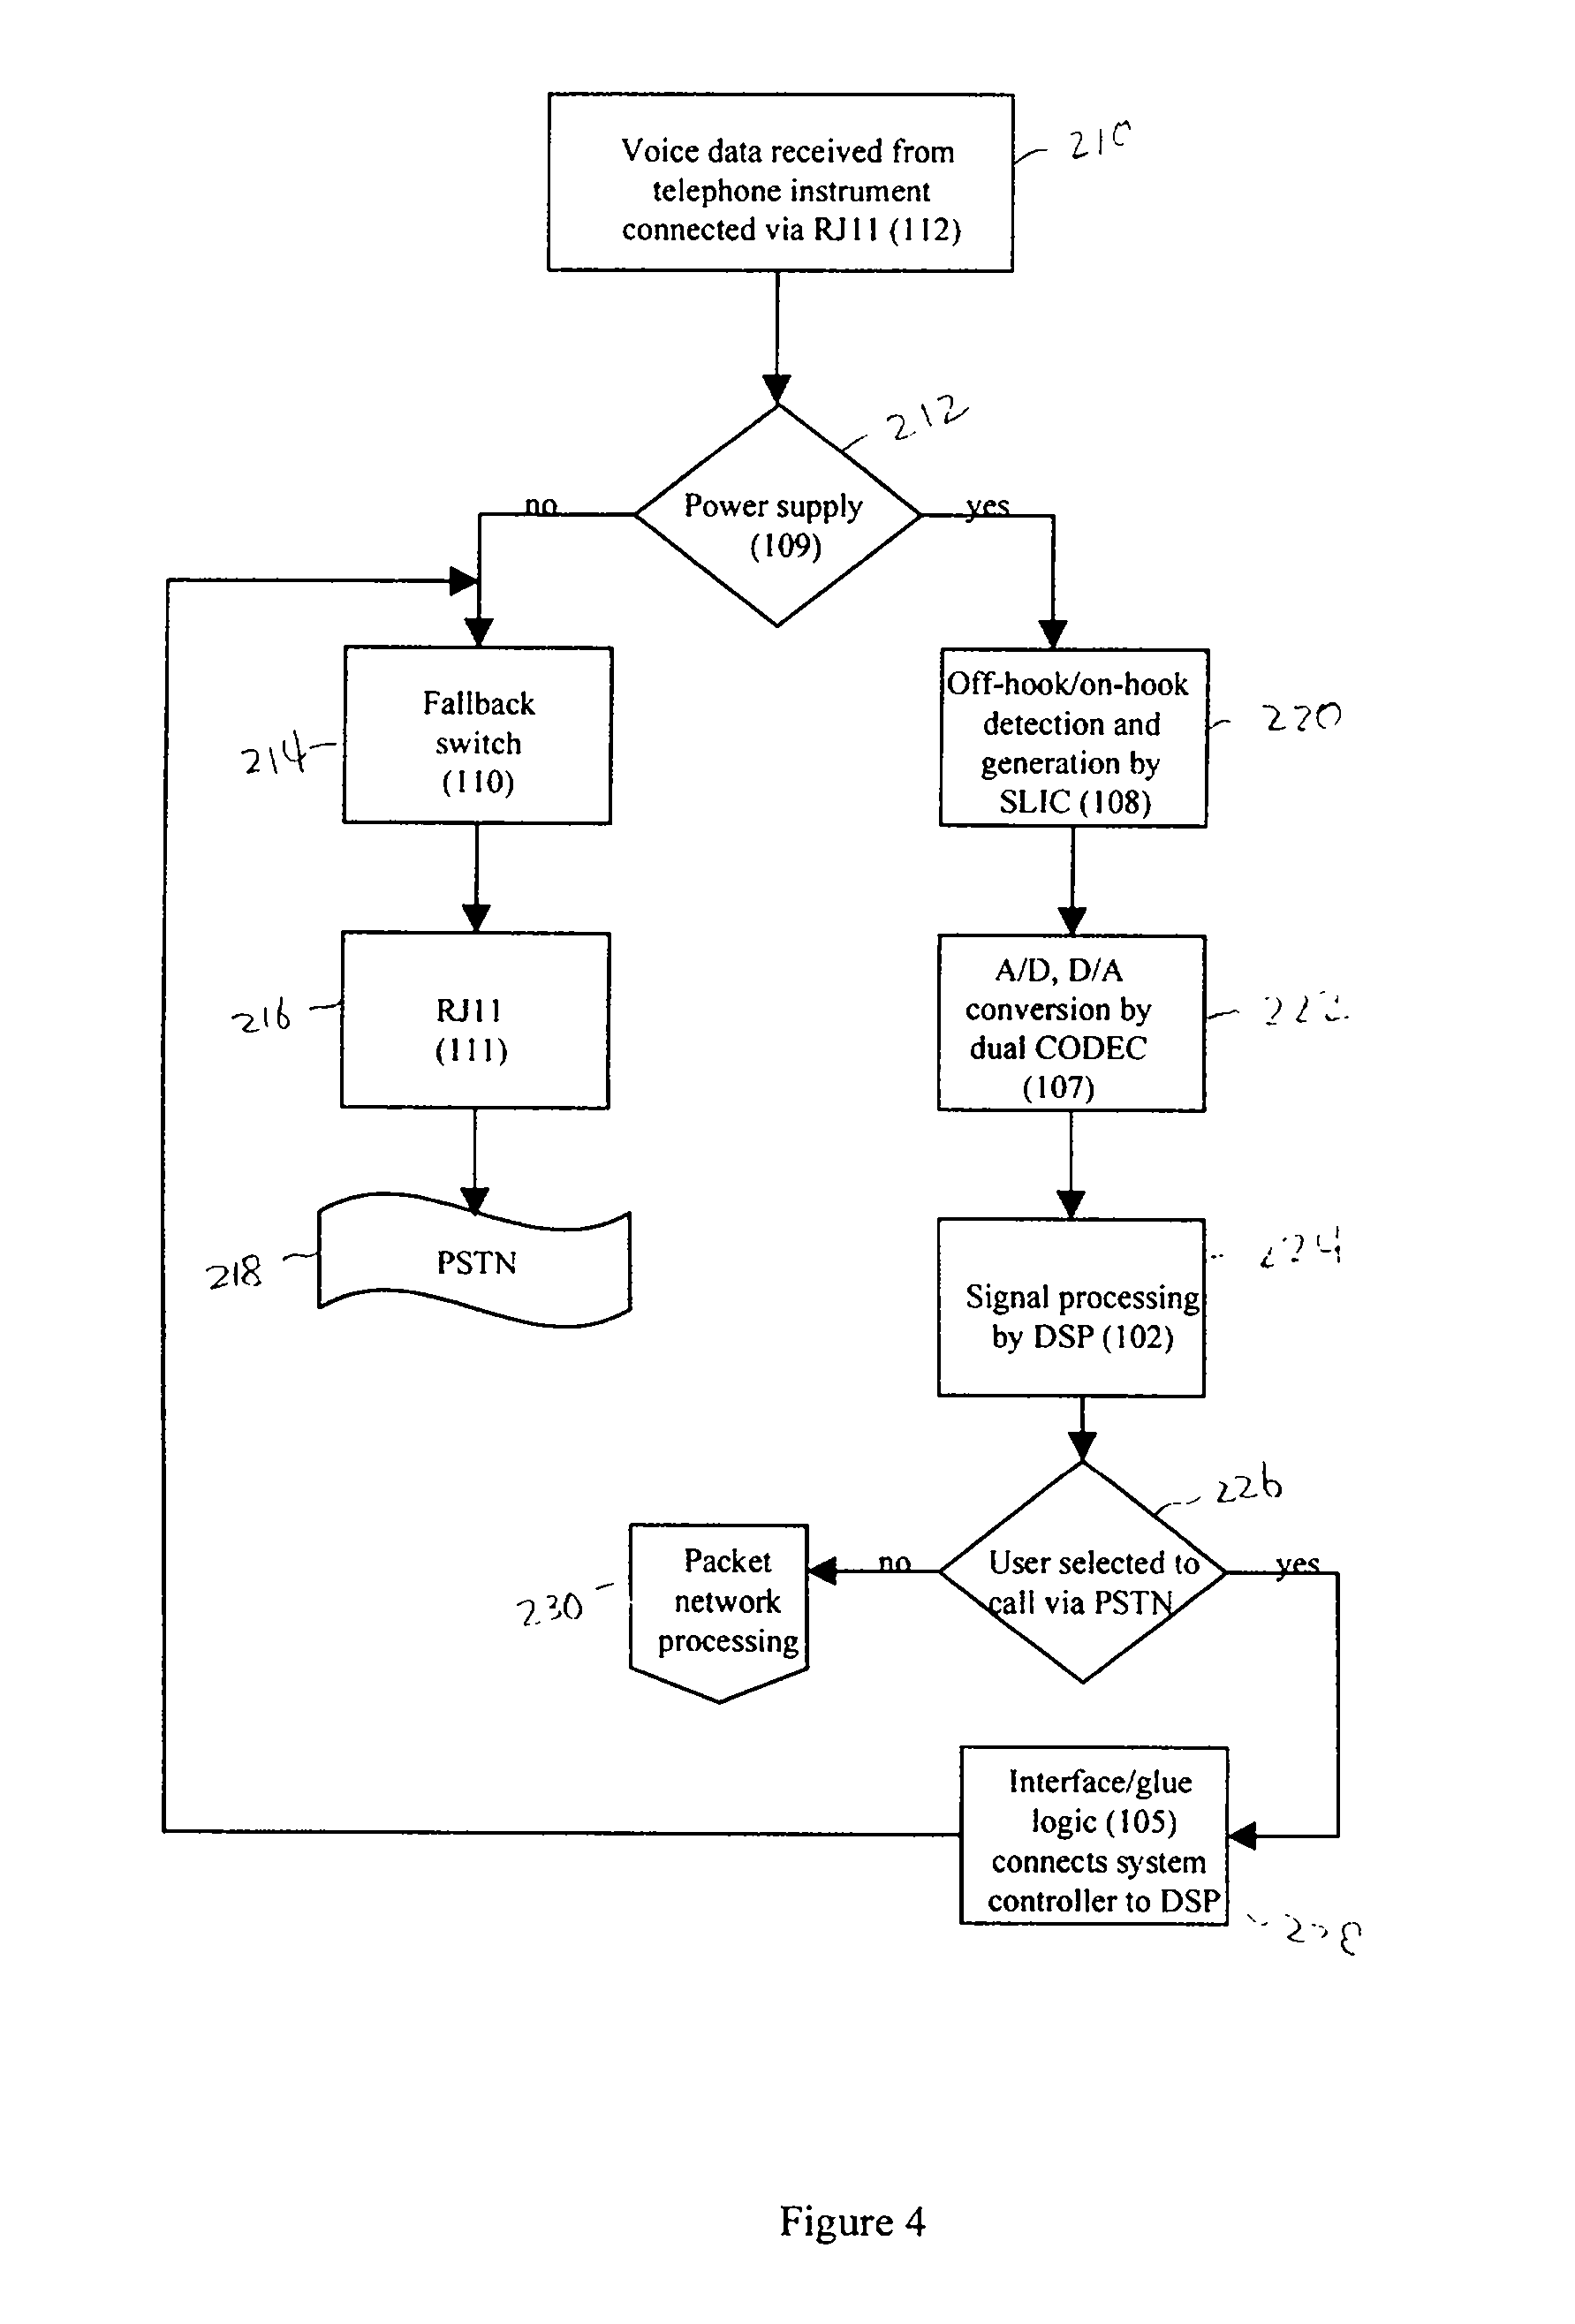 Packet network telephone interface system for pots